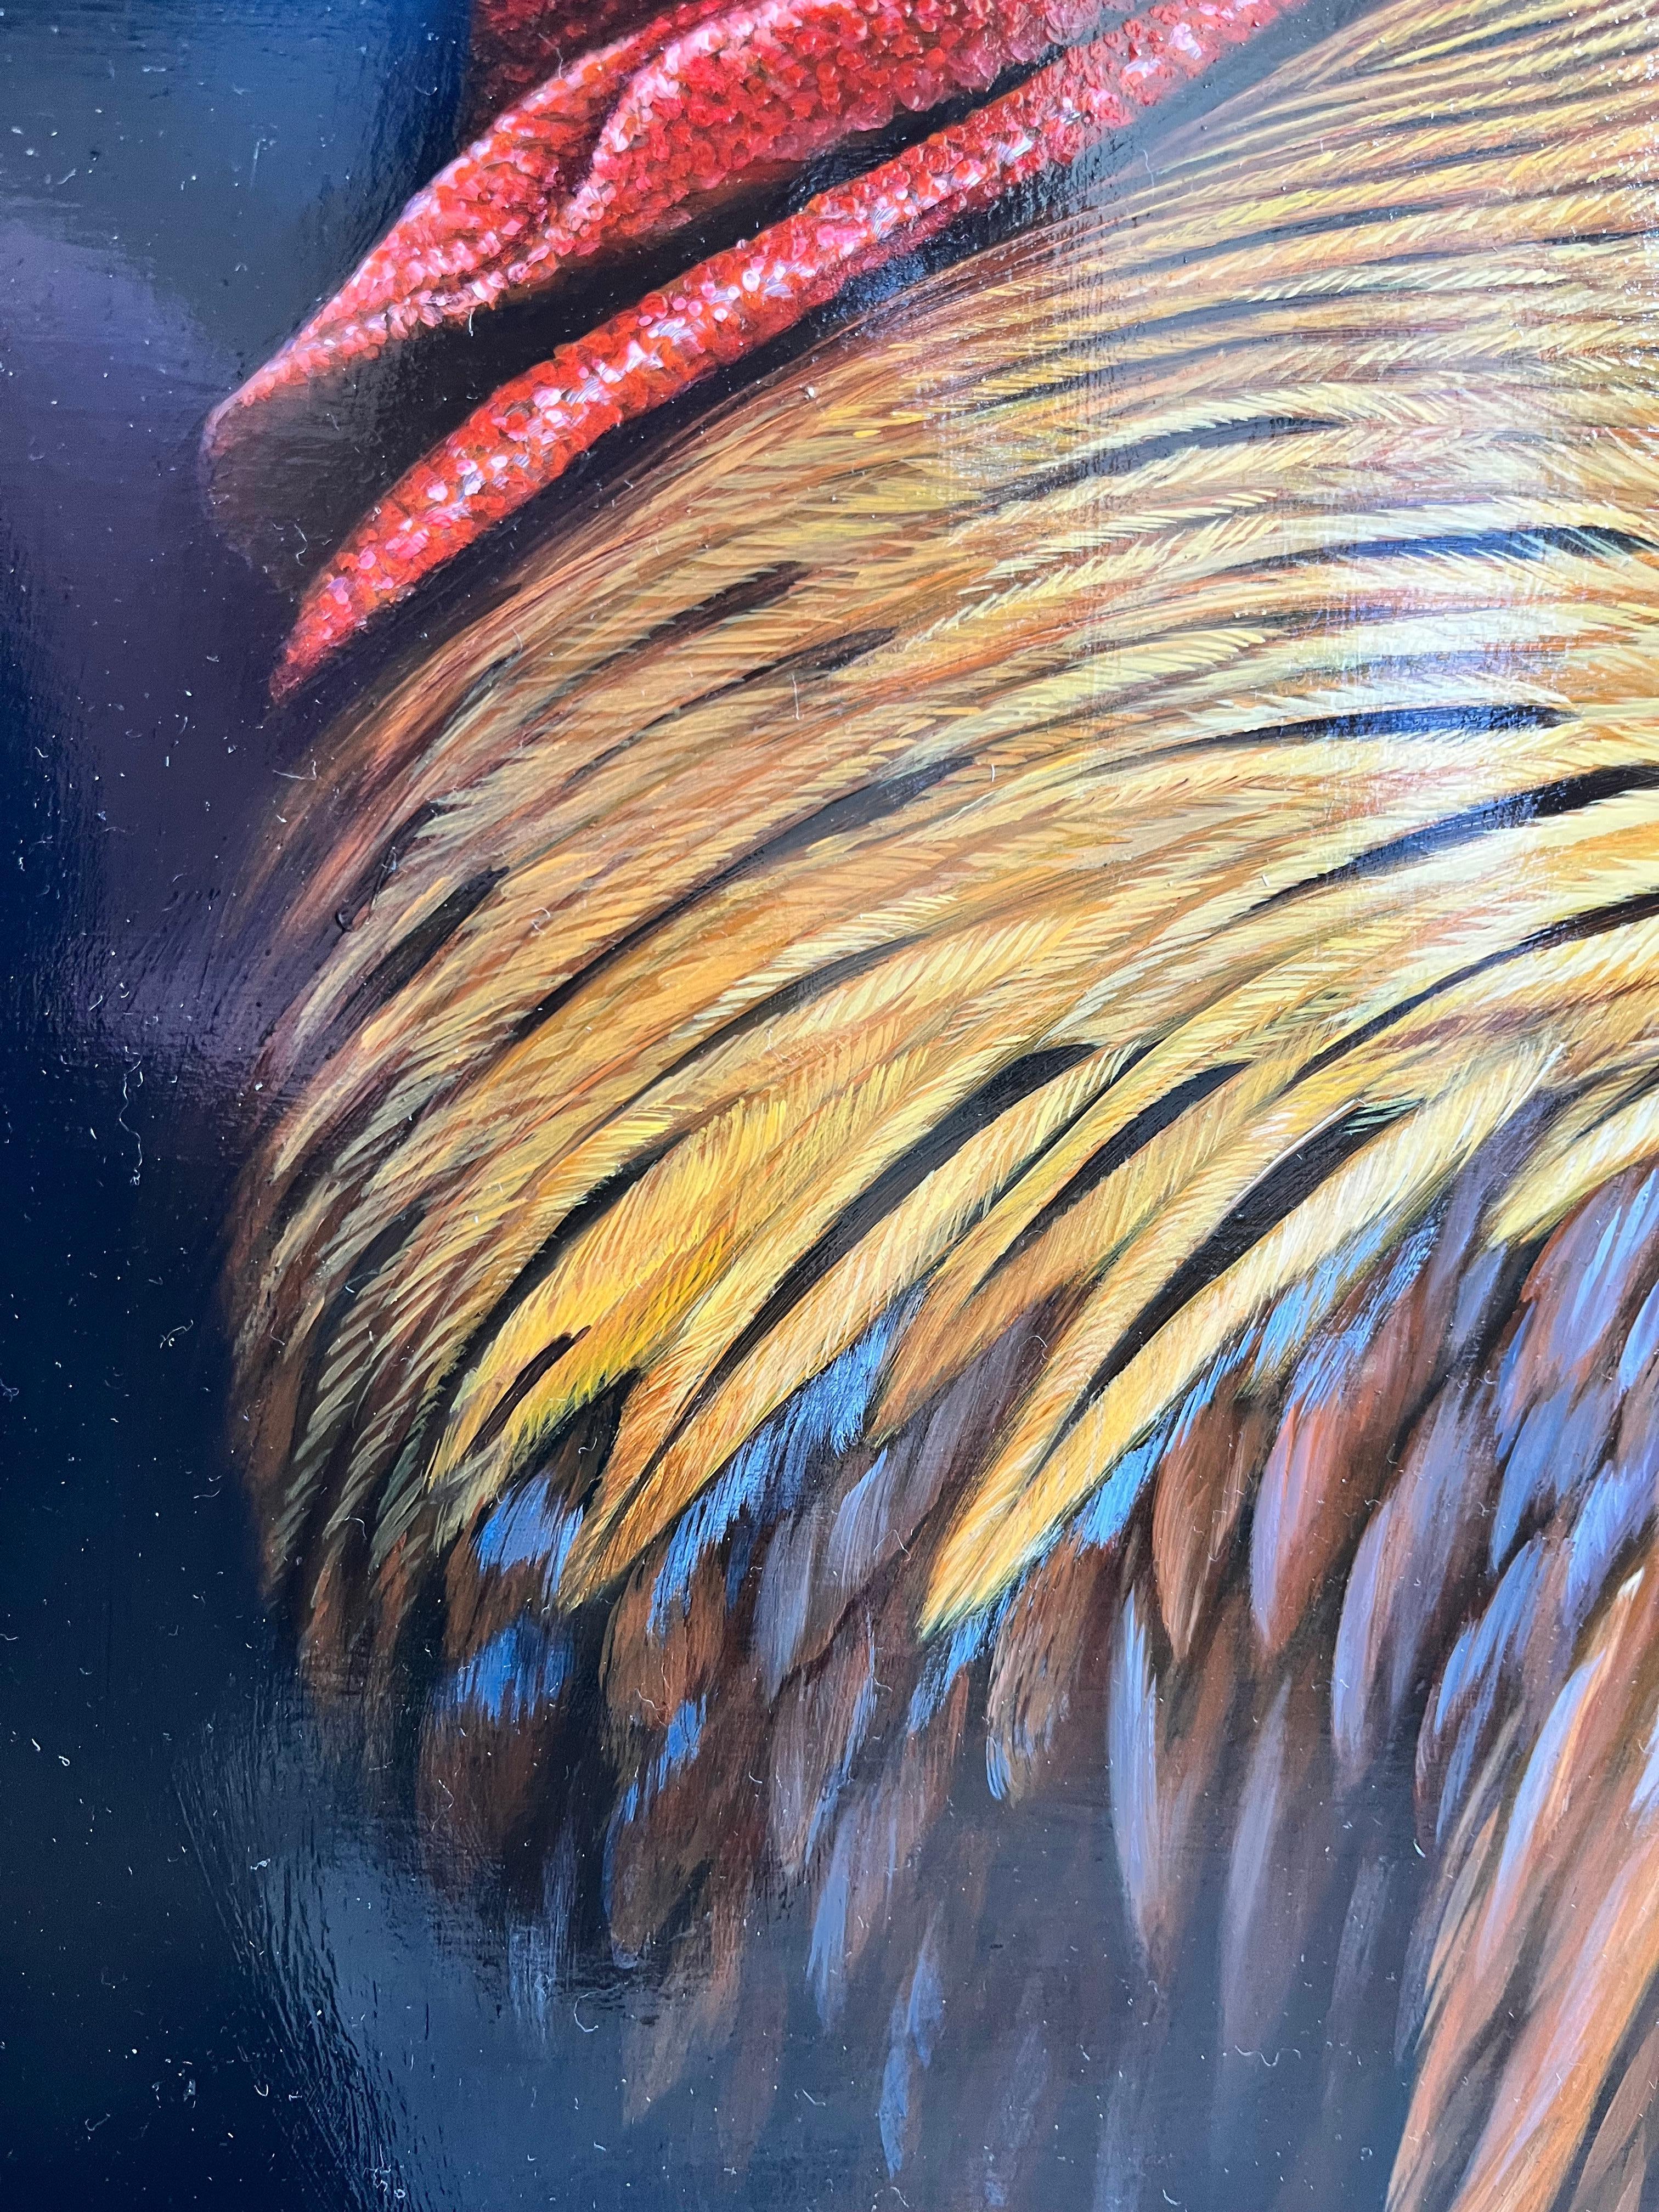 ''Cockerel'' by Ben Waddams is a Contemporary Realist Wildlife oil painting of a large cockerel standing regal. Colourful bright and bold, a work that would stand out in any interior setting.  

Ben Waddams is a British wildlife artist living and